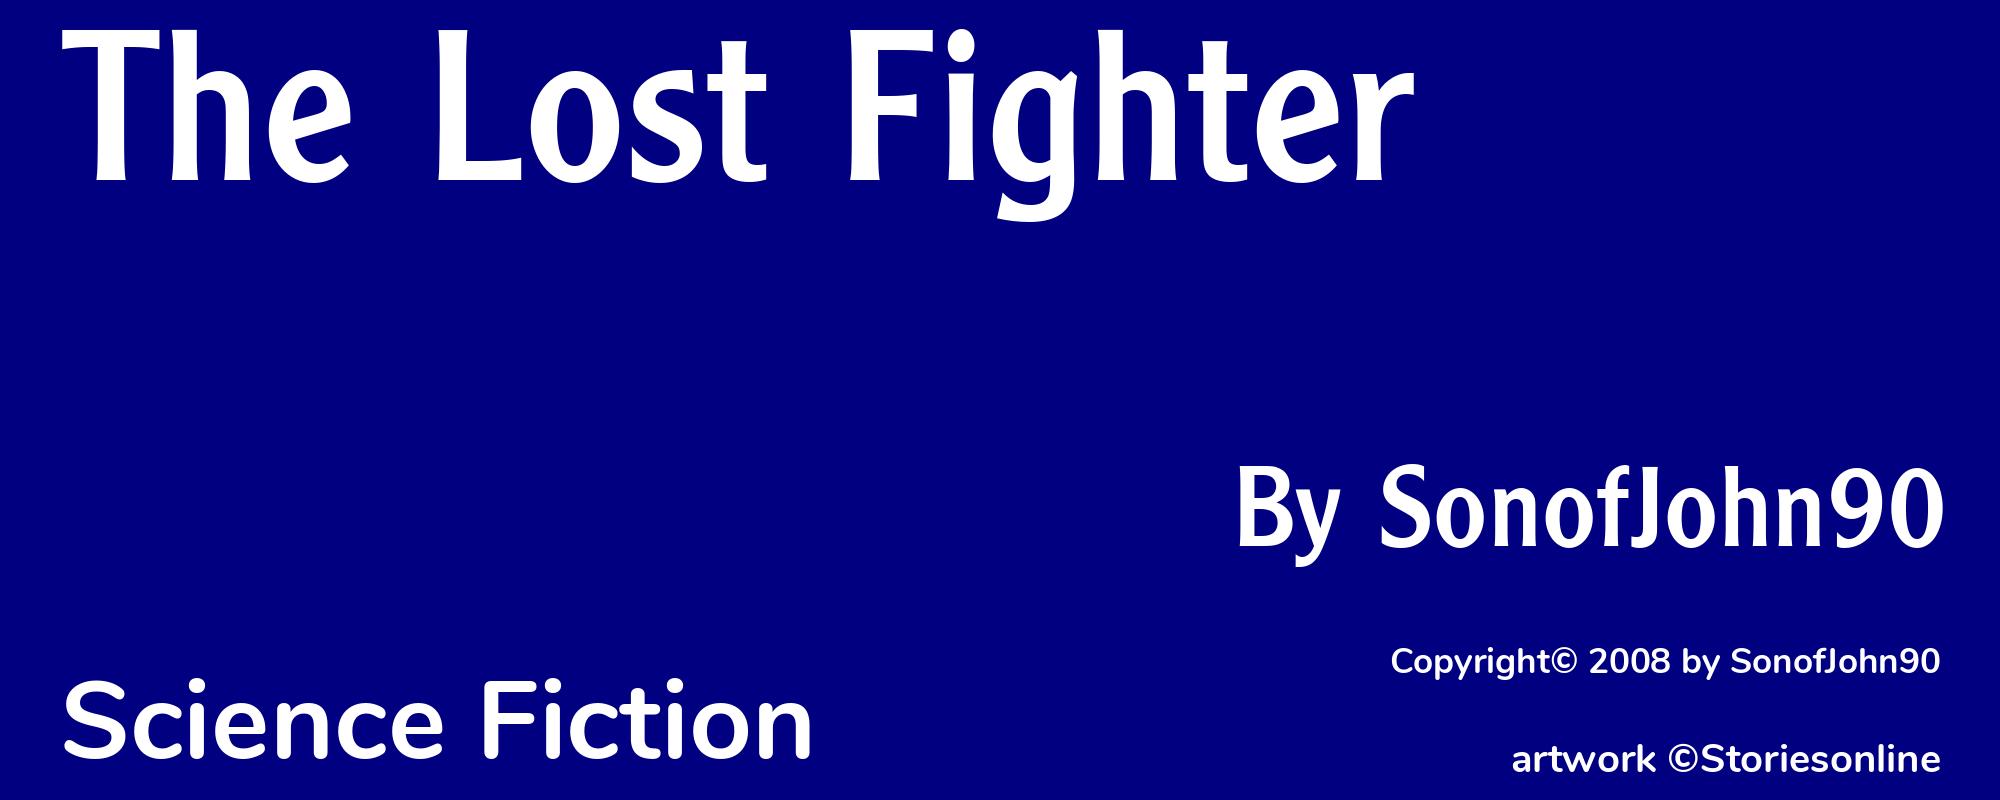 The Lost Fighter - Cover